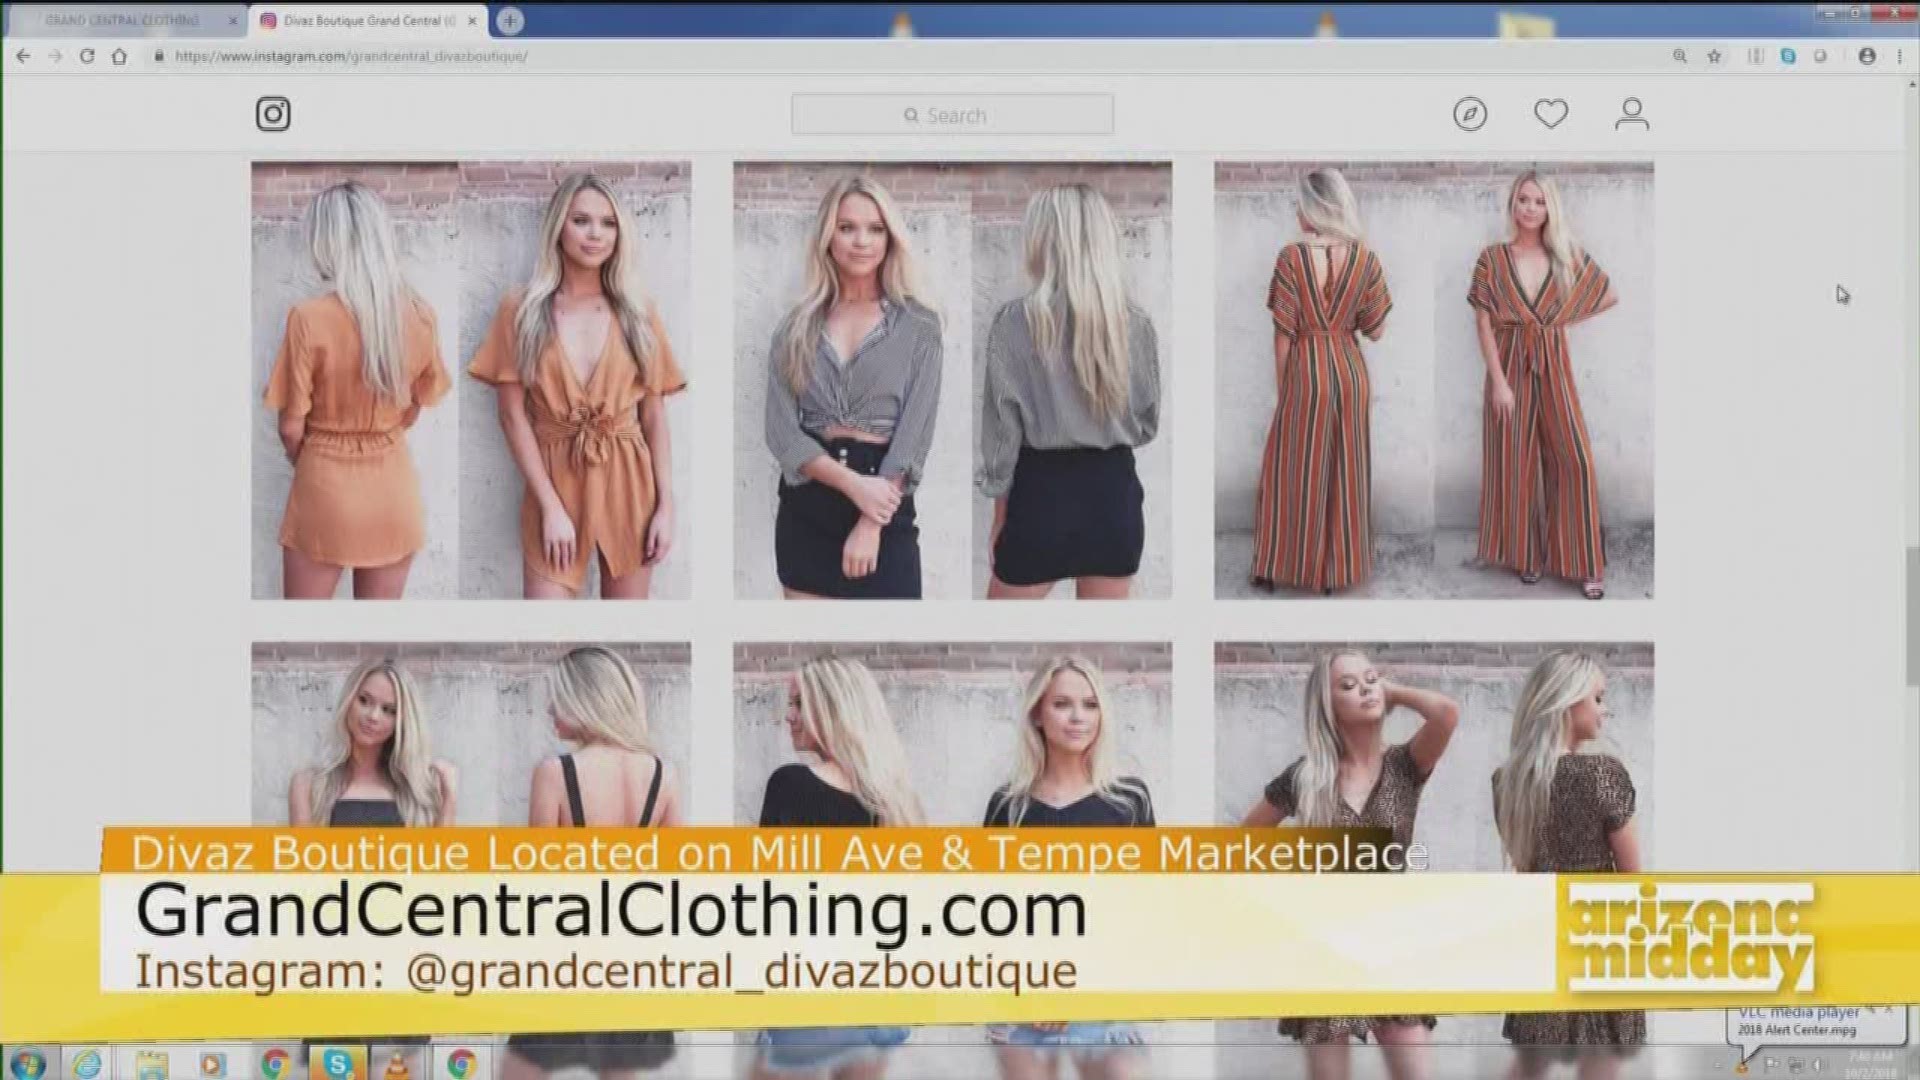 From necklaces, to belts and jumpsuits Andrea from Divaz Boutique shows us the hottest looks for spring.